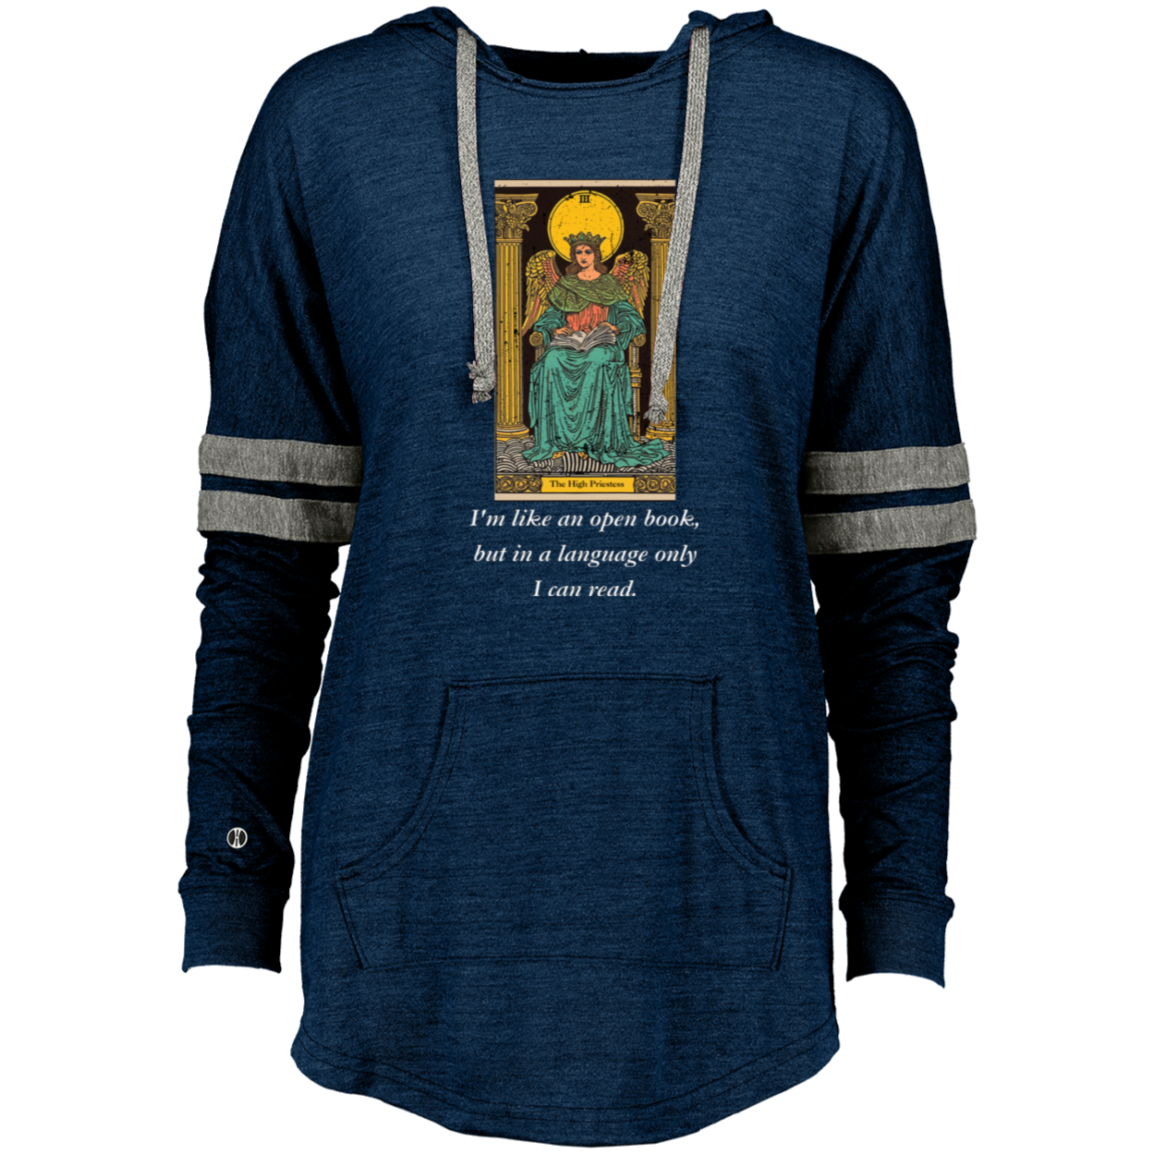 Funny the high priestess women's navy tarot card hoodie pullover from BLK Moon Shop